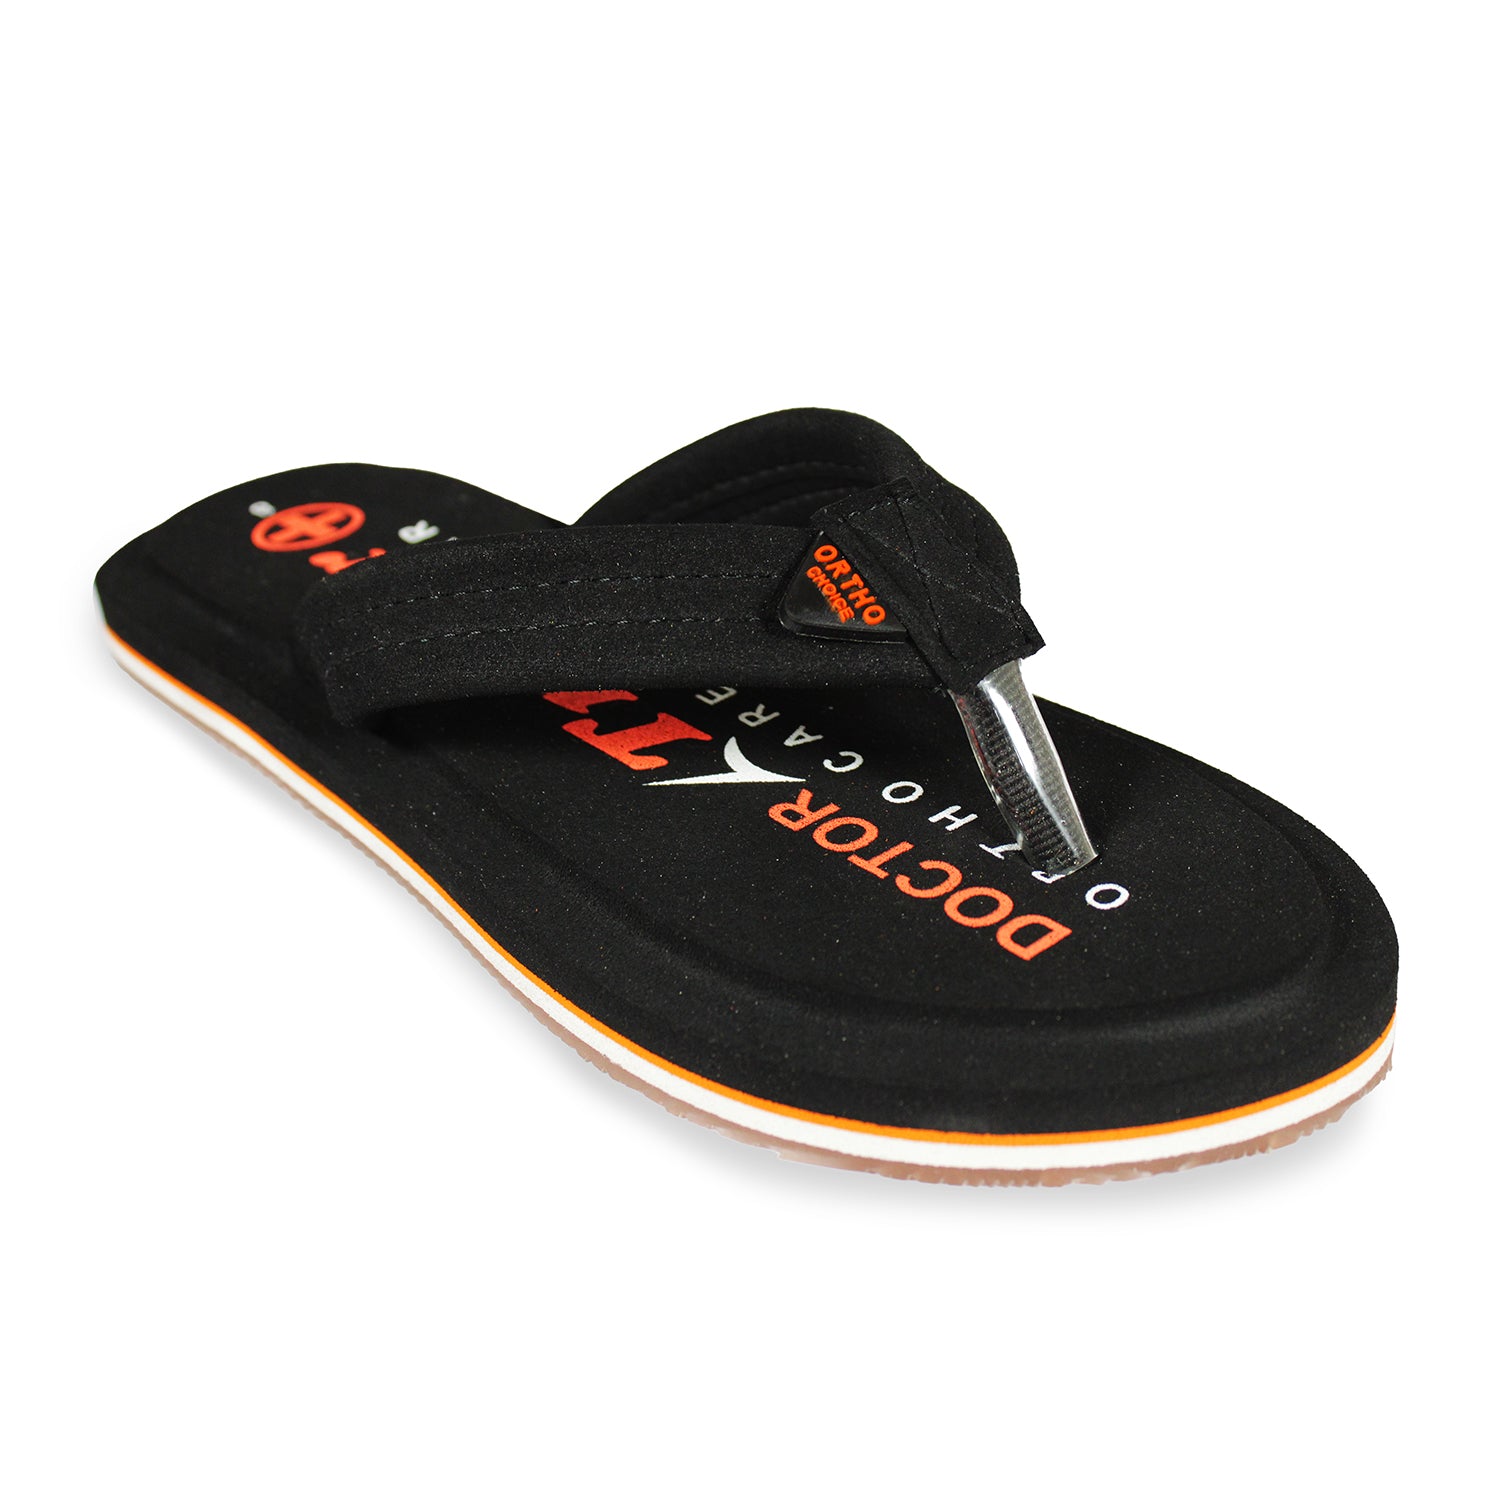 Tracer Slippers| Black | Men's Collection